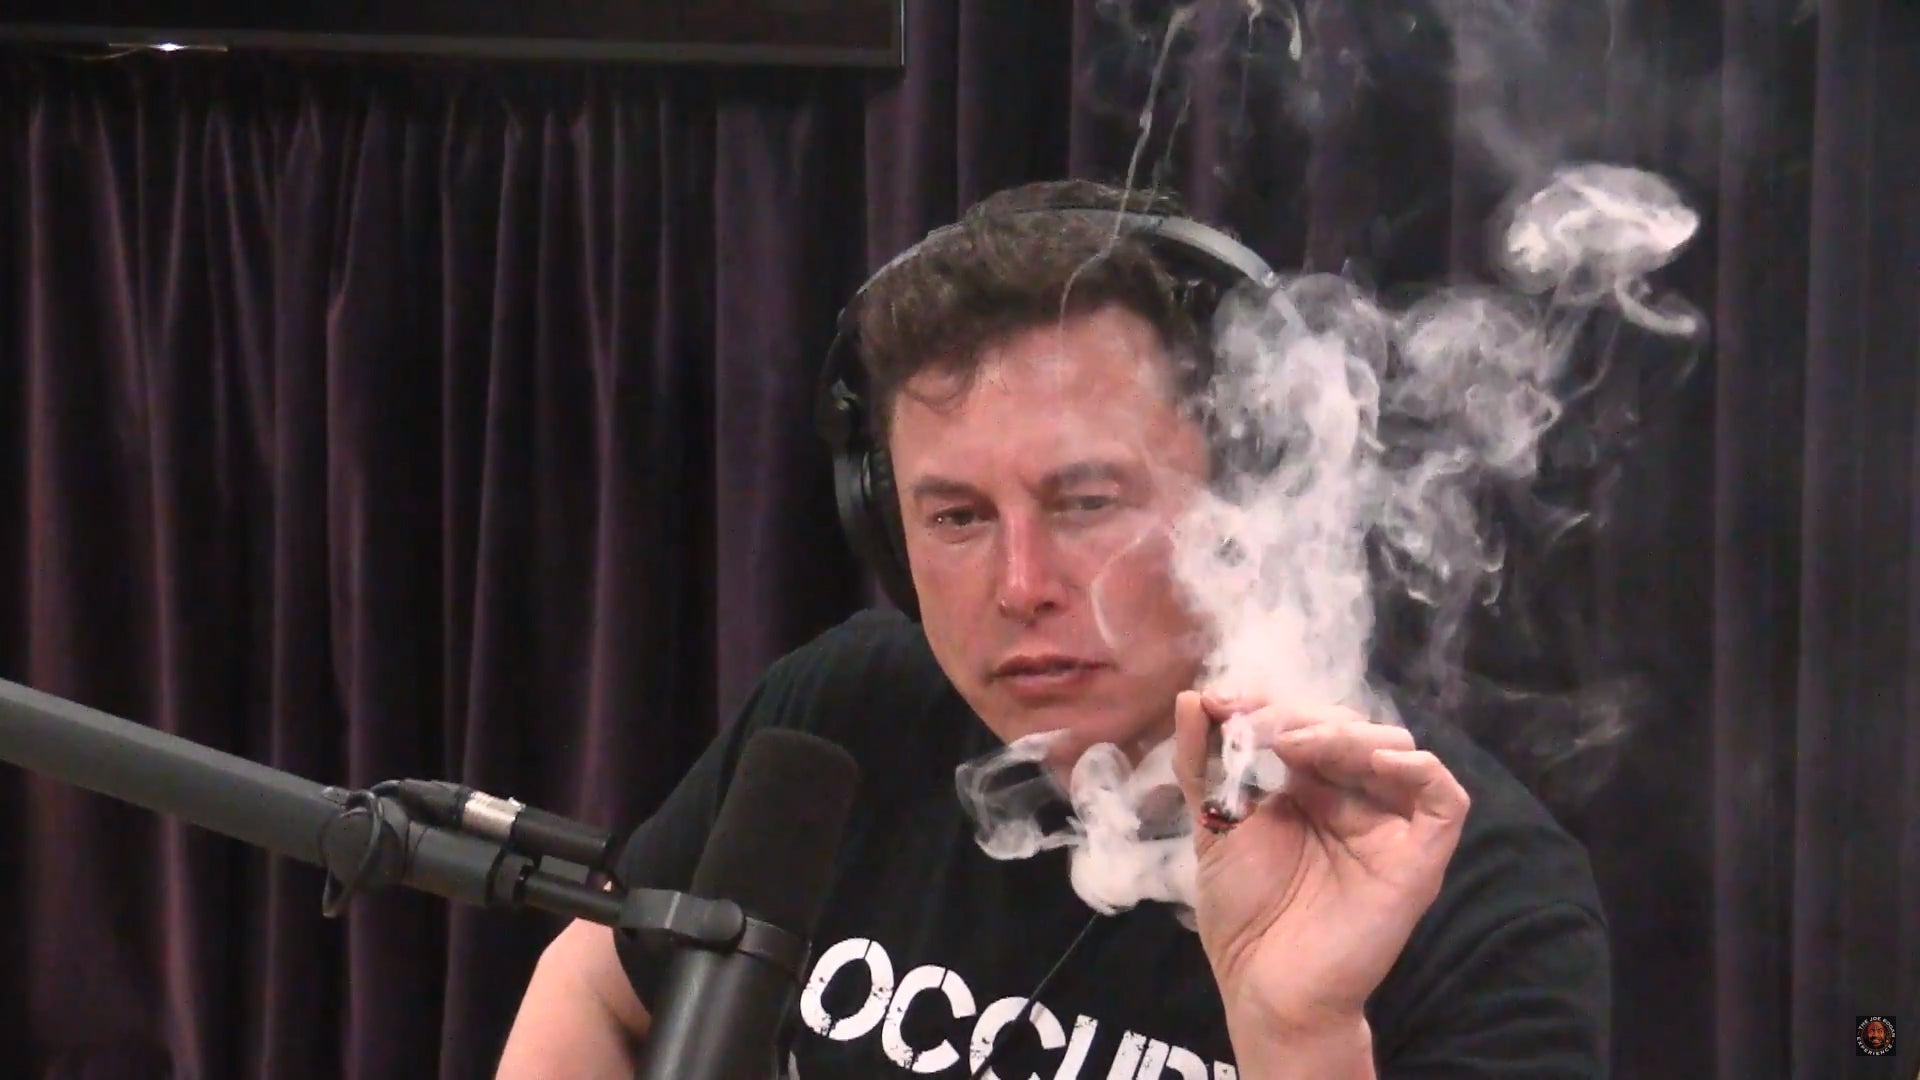 Elon Musk’s ‘Taking Tesla Private at $420’ Was Definitely Weed Reference, Says SEC